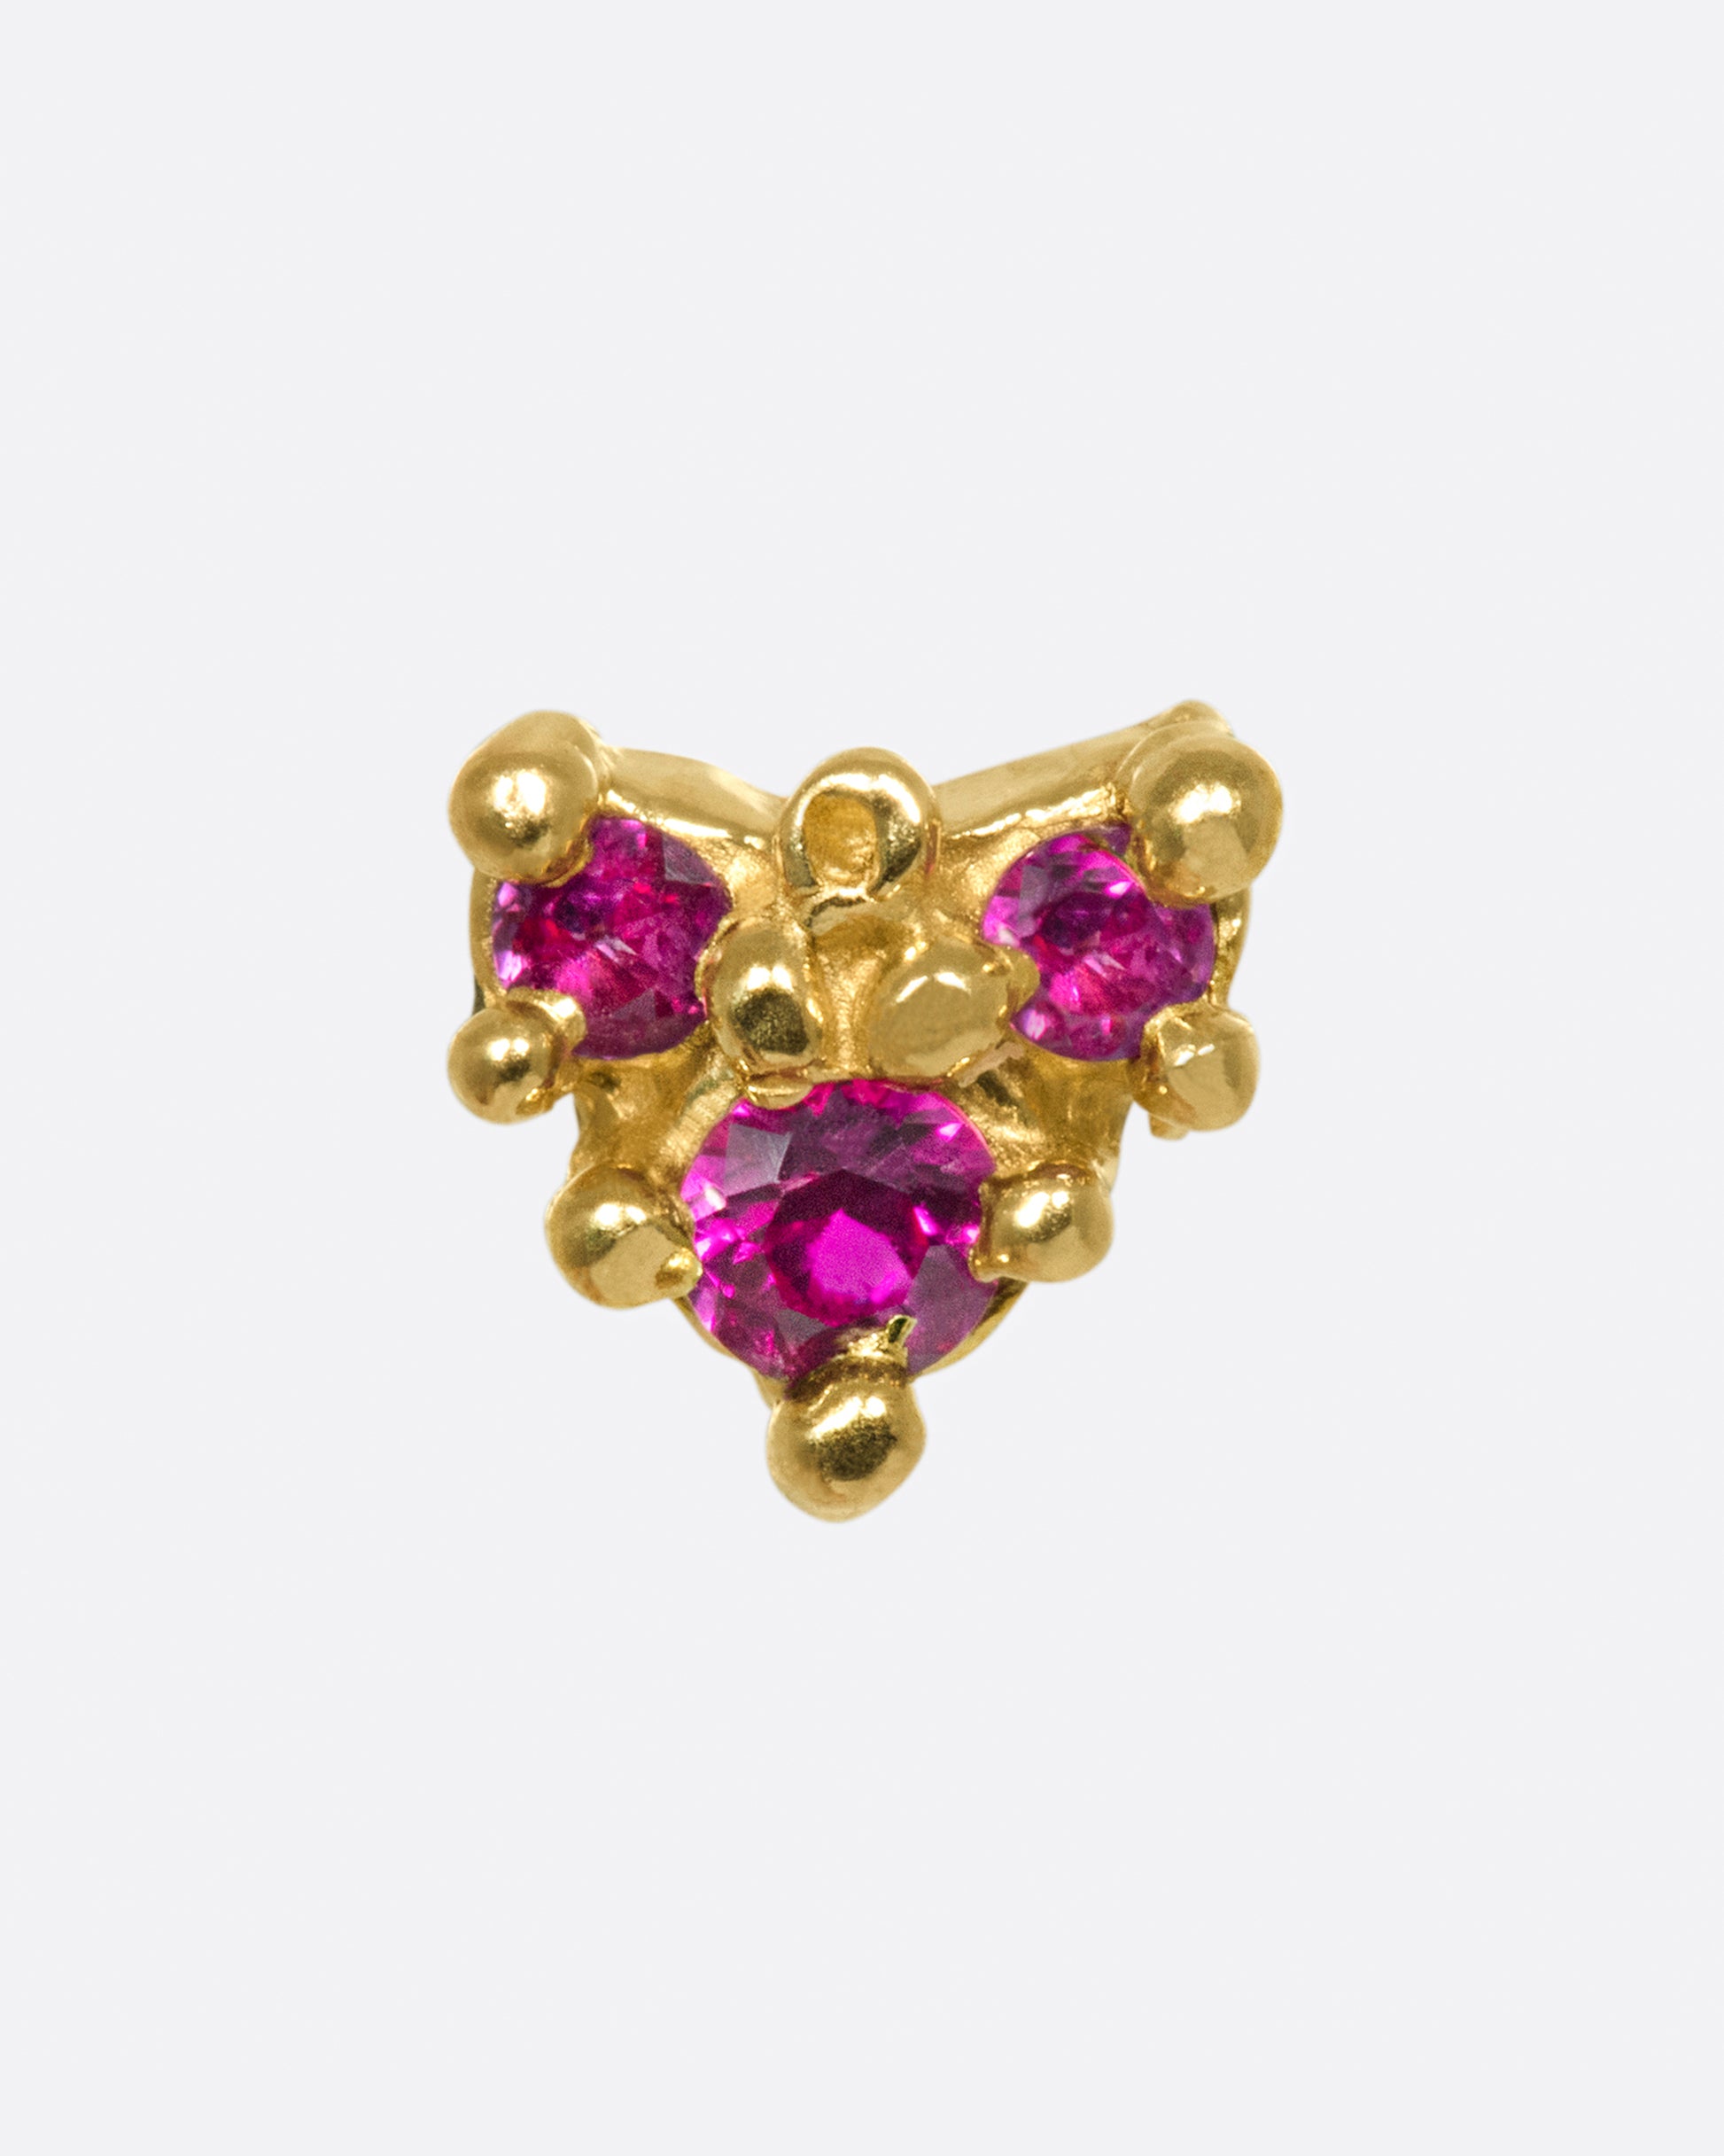 A triangle-like shape, but more organic and dotted with rubies; this piece will add both color and texture to your ear.